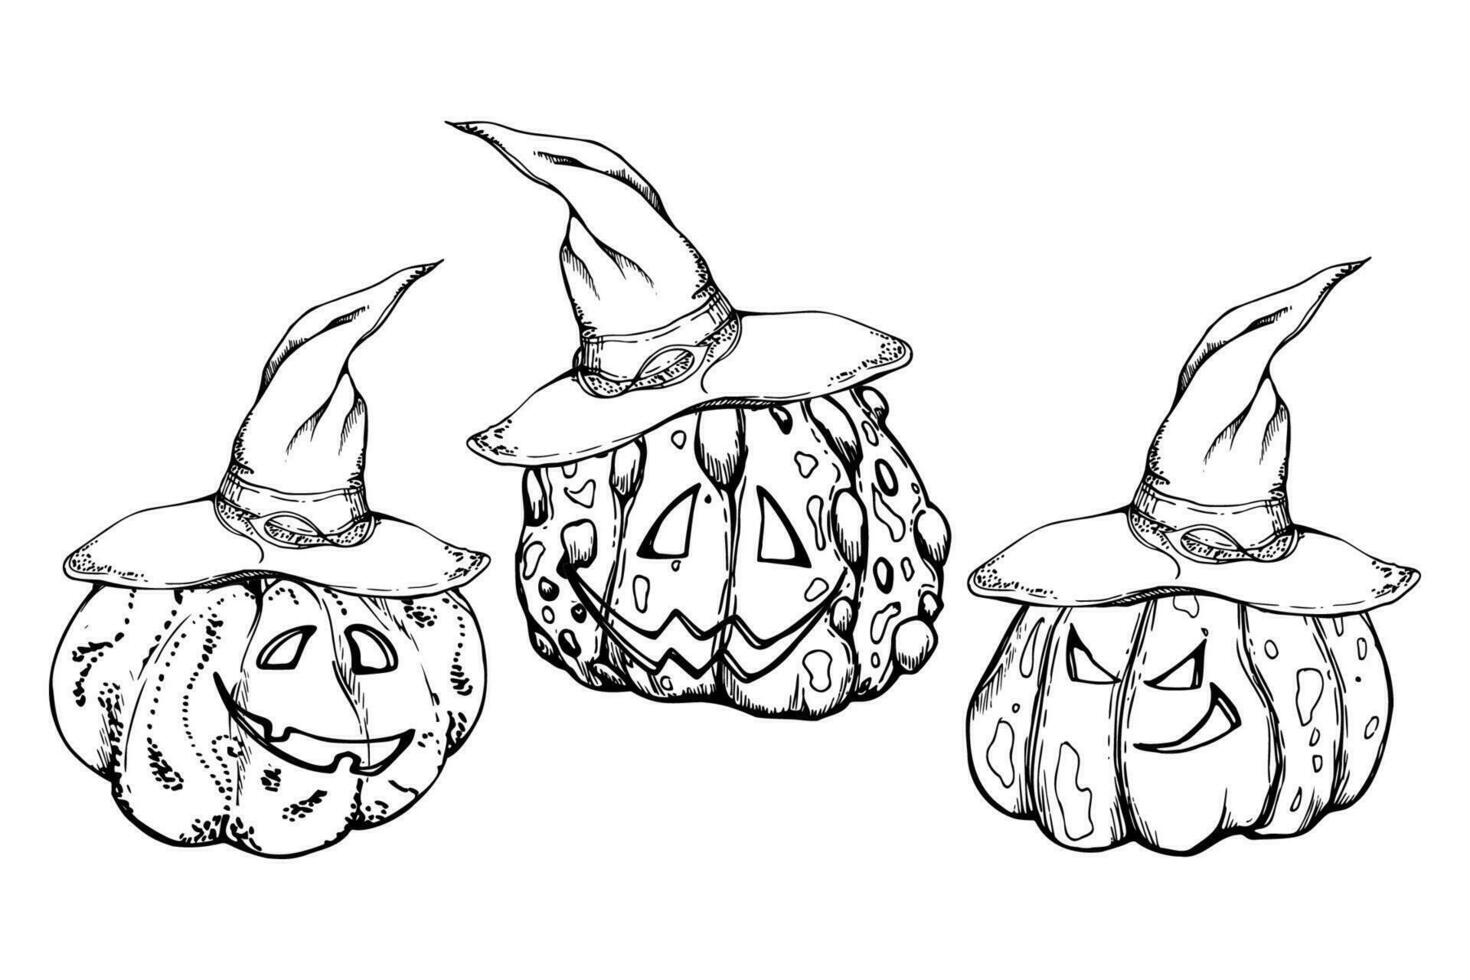 Hand drawn ink vector witch pumpkins in pointy hats jack-o-lantern. Sketch illustration art for Halloween, party, witchcraft. Isolated object, outline. Design shops logo, print, website, card, costume